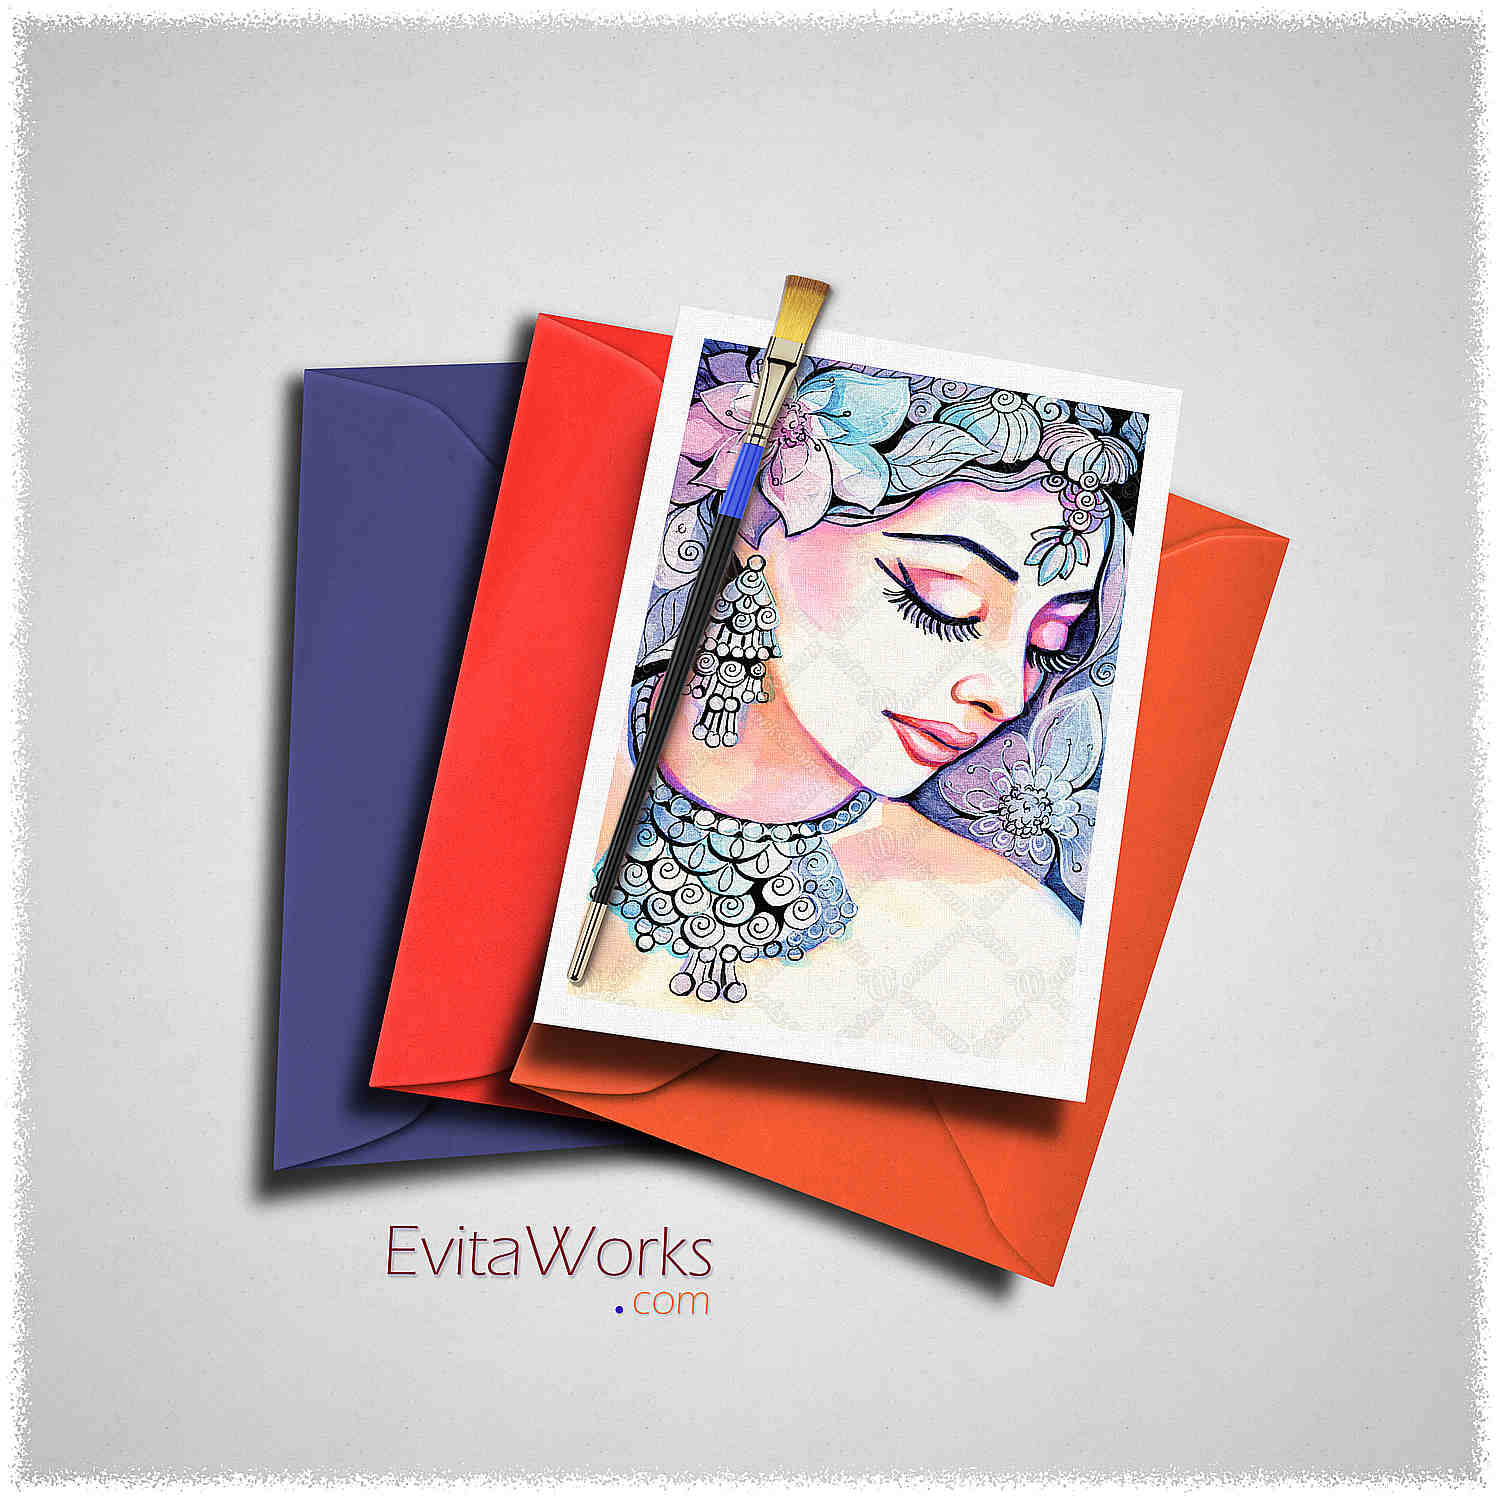 Hit to learn about "Sea Mist, Indian woman art" on cards